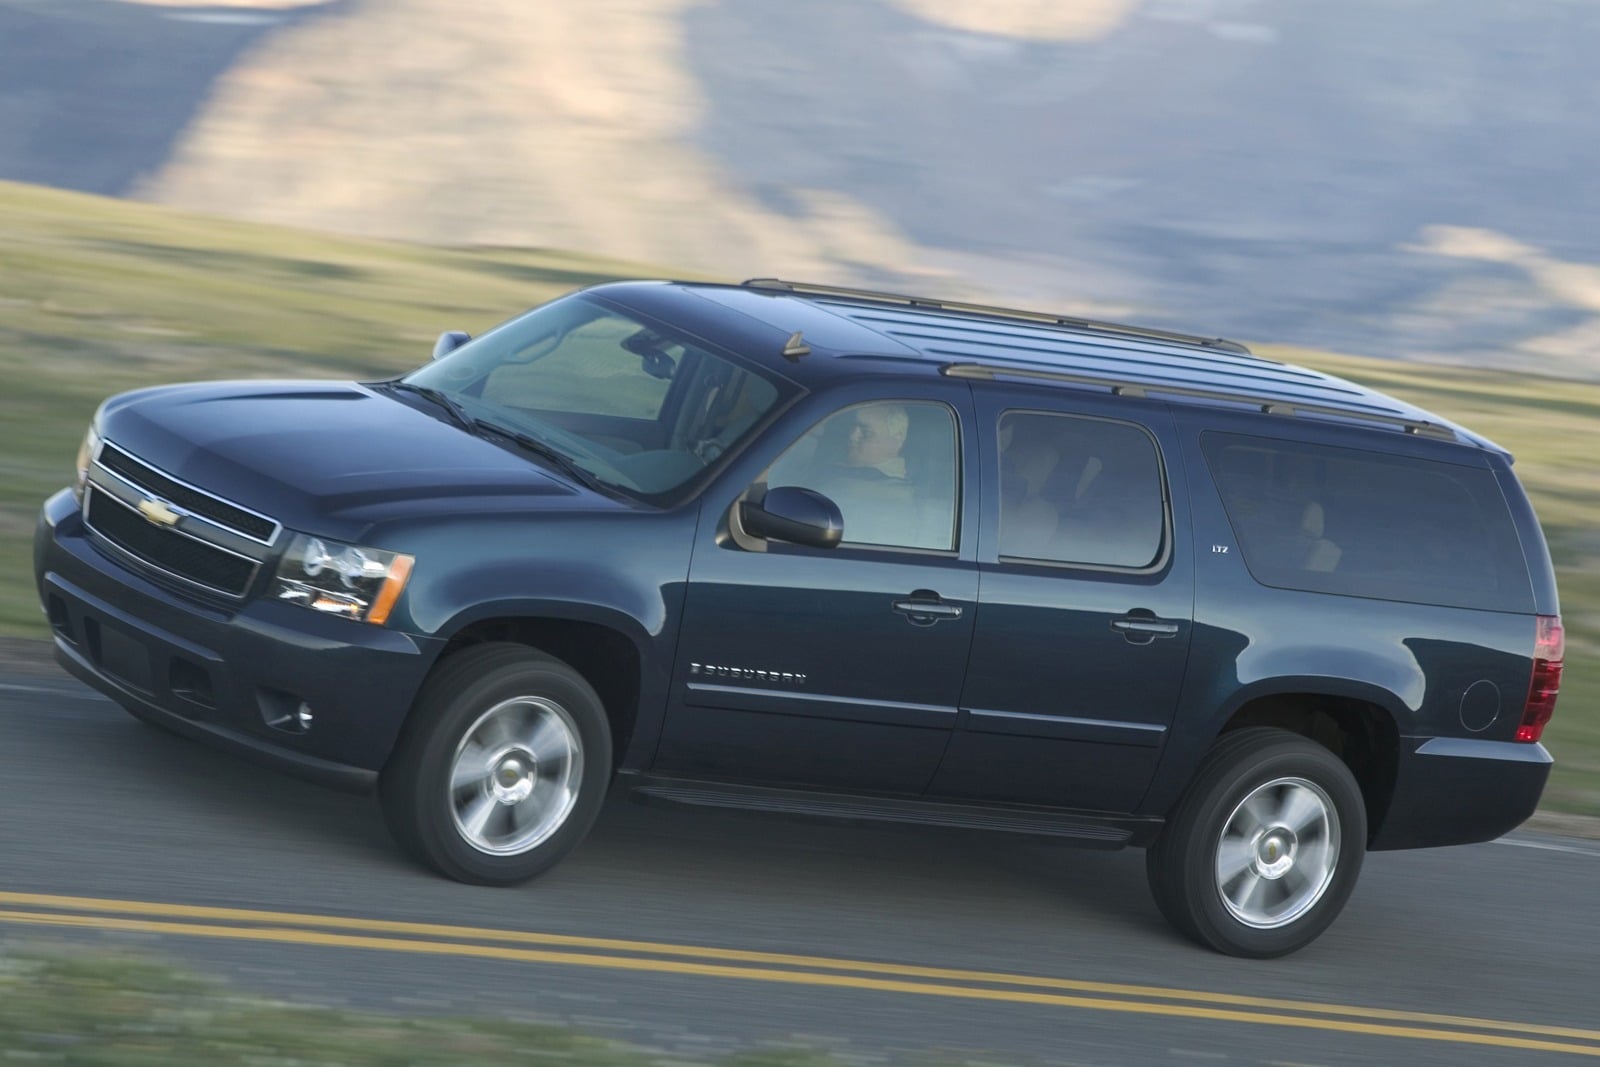 2007 Chevy Suburban Review & Ratings | Edmunds